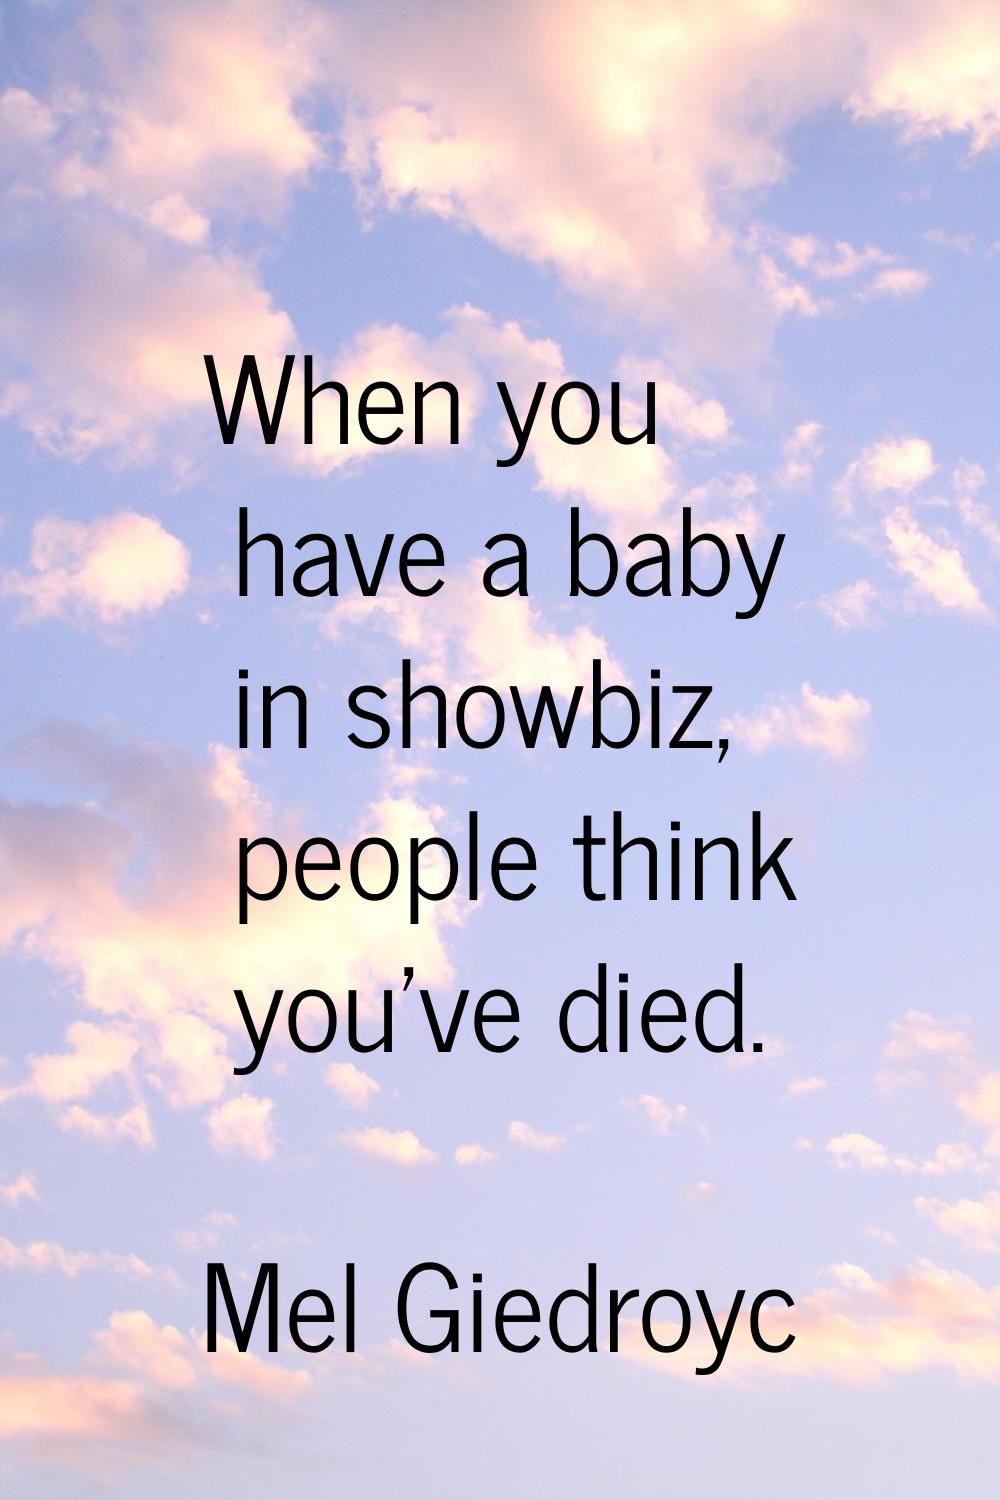 When you have a baby in showbiz, people think you've died.